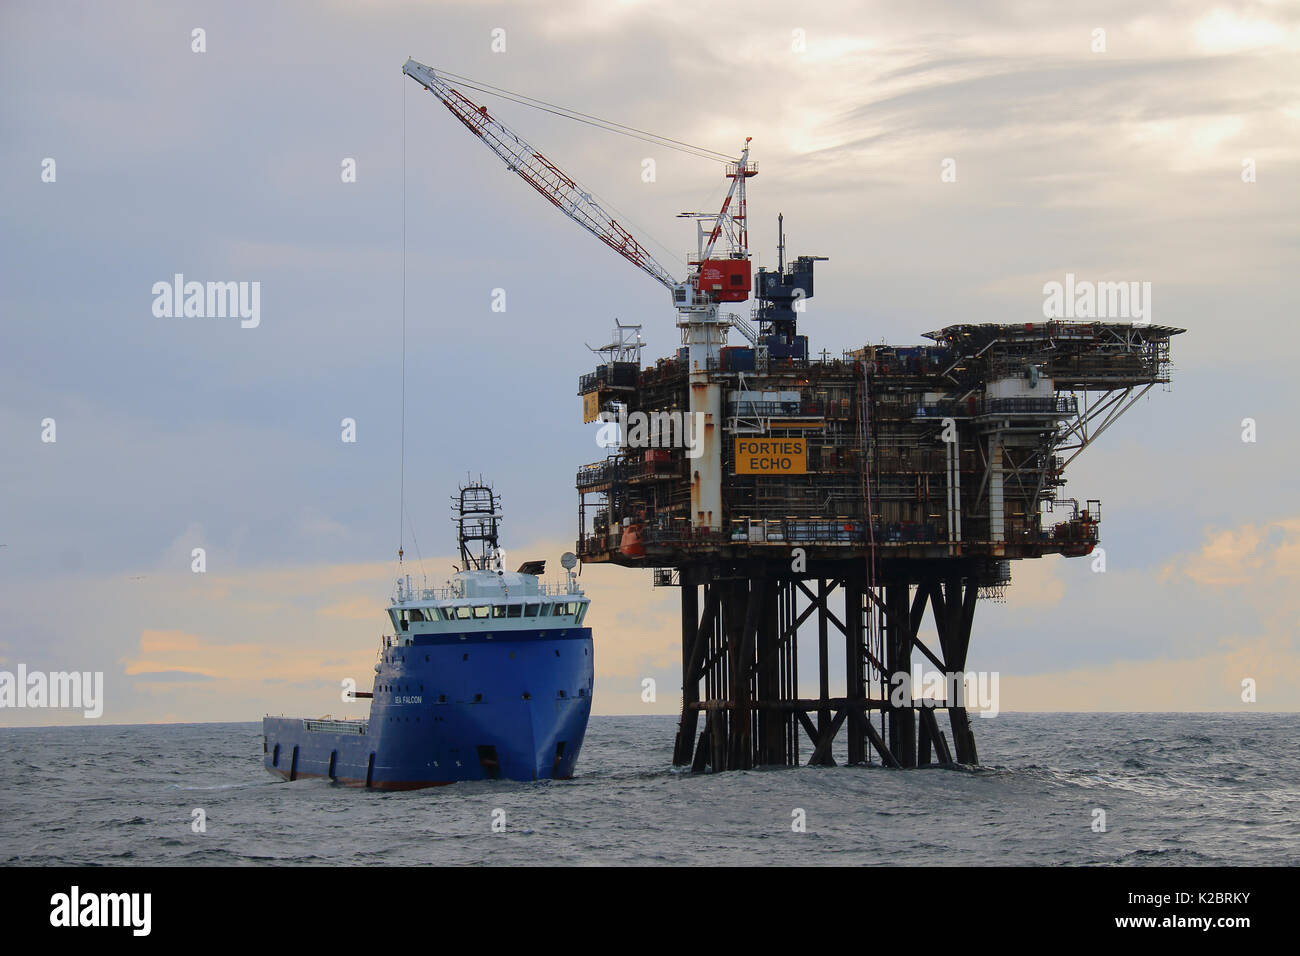 Supply vessel 'Sea Falcon' offloading cargo at the 'Forties Echo' platform, North Sea, October 2014.  All non-editorial uses must be cleared individually. Stock Photo